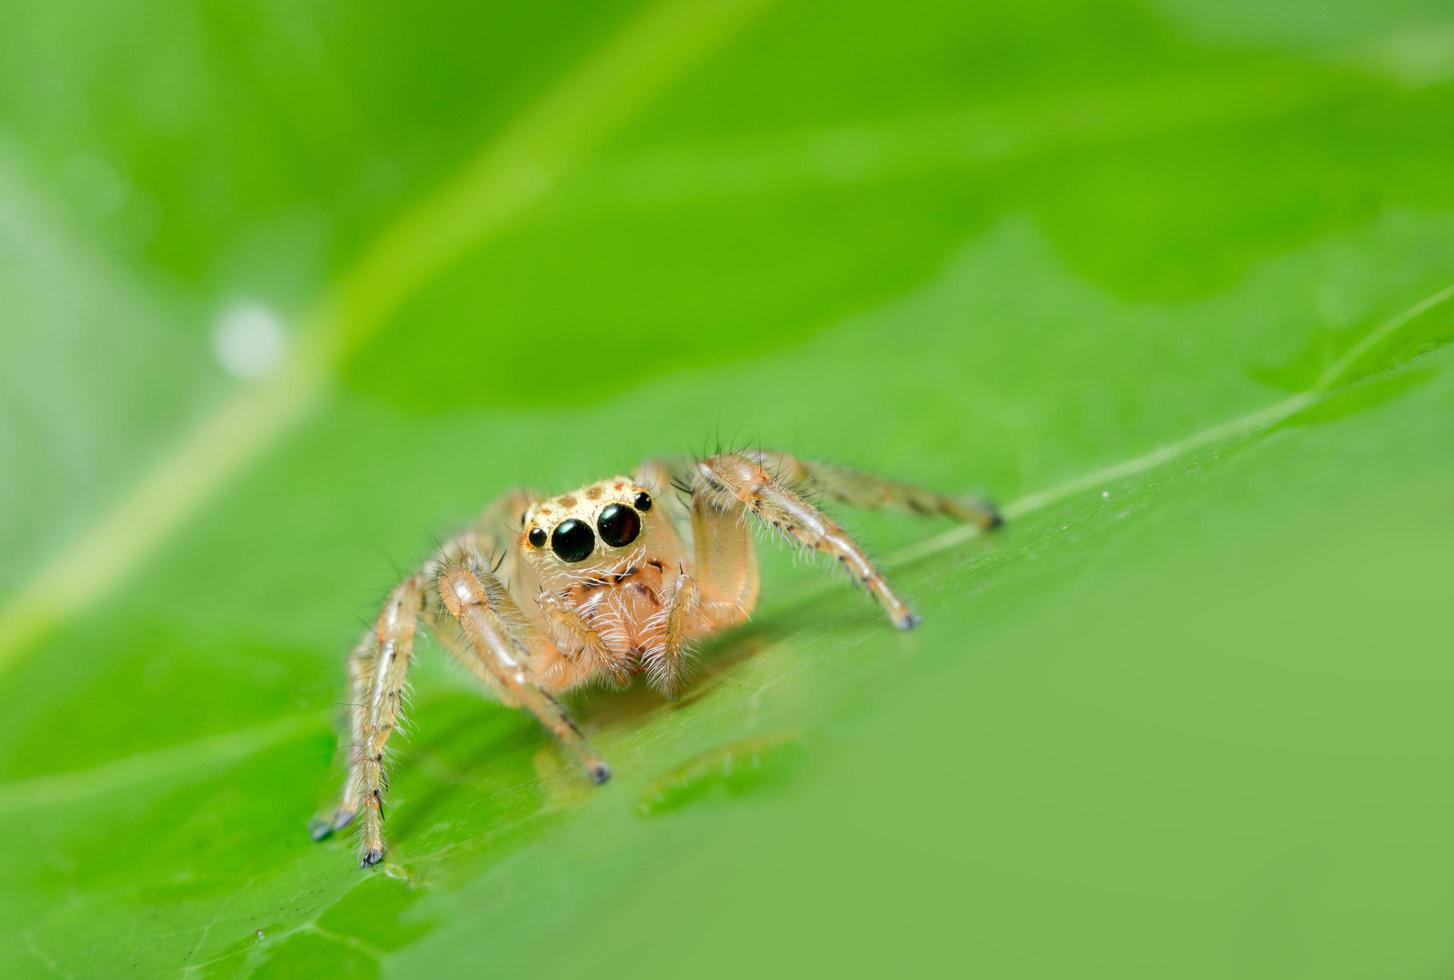 Spider on a leaf photo